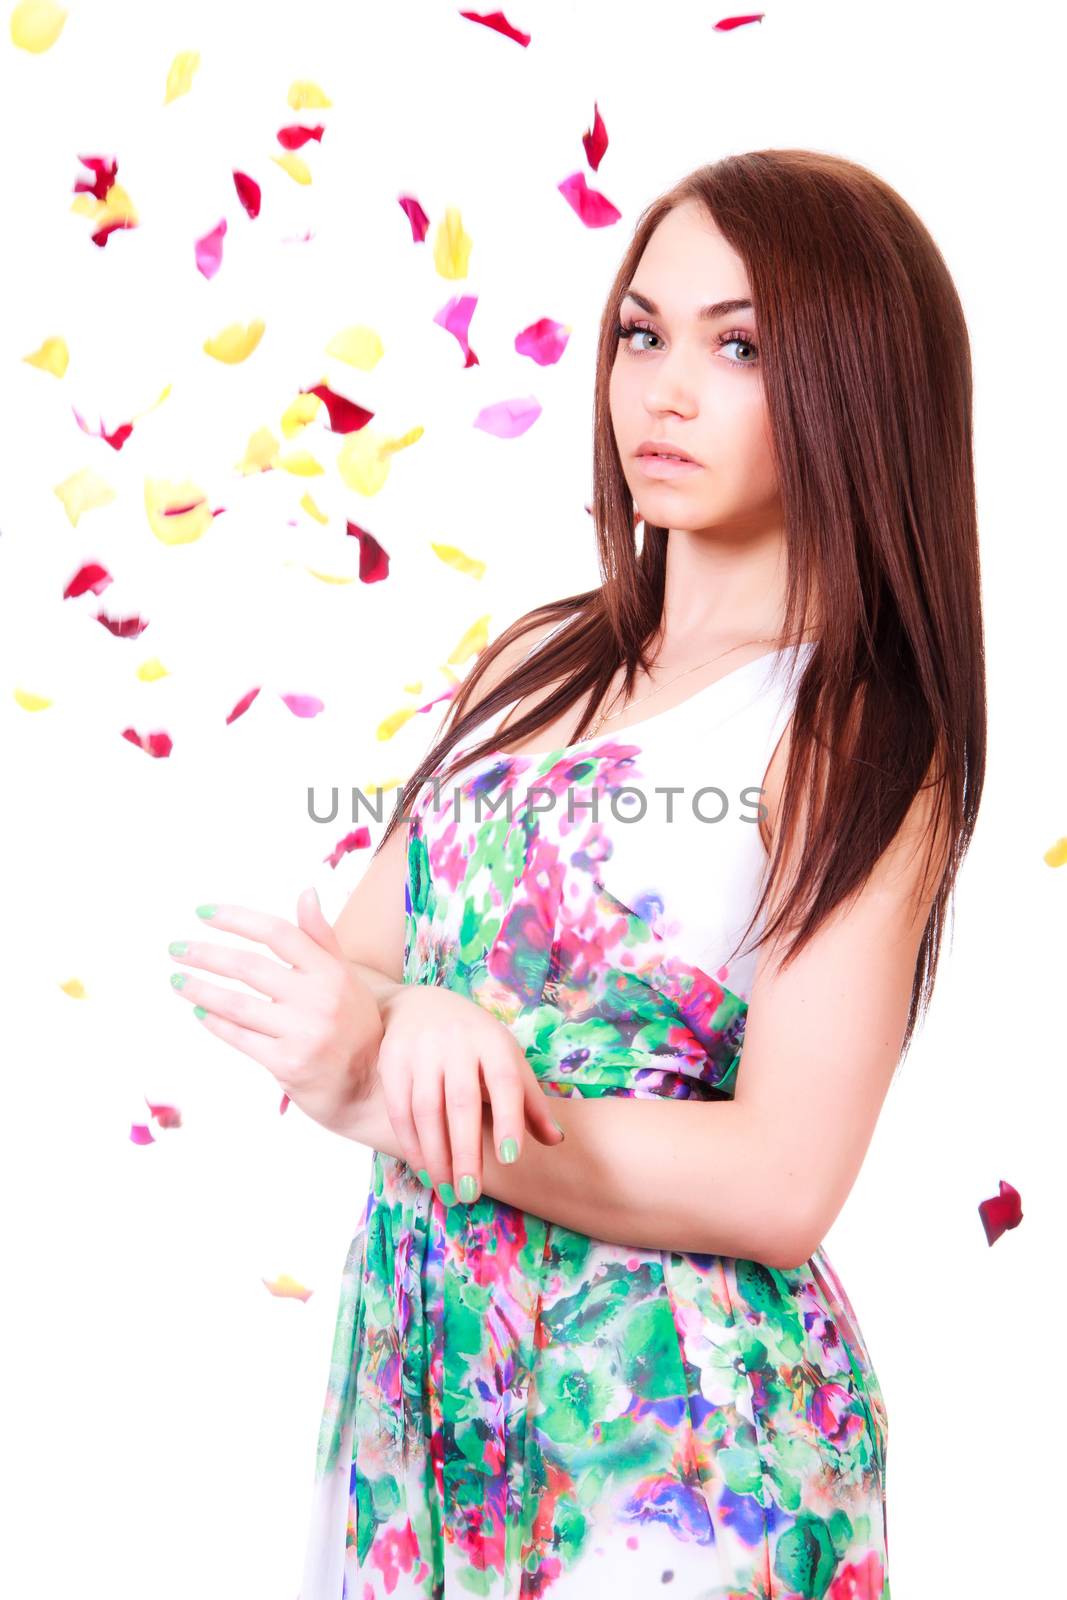 Beautiful young woman in a bright many-colored dress isolated over white background